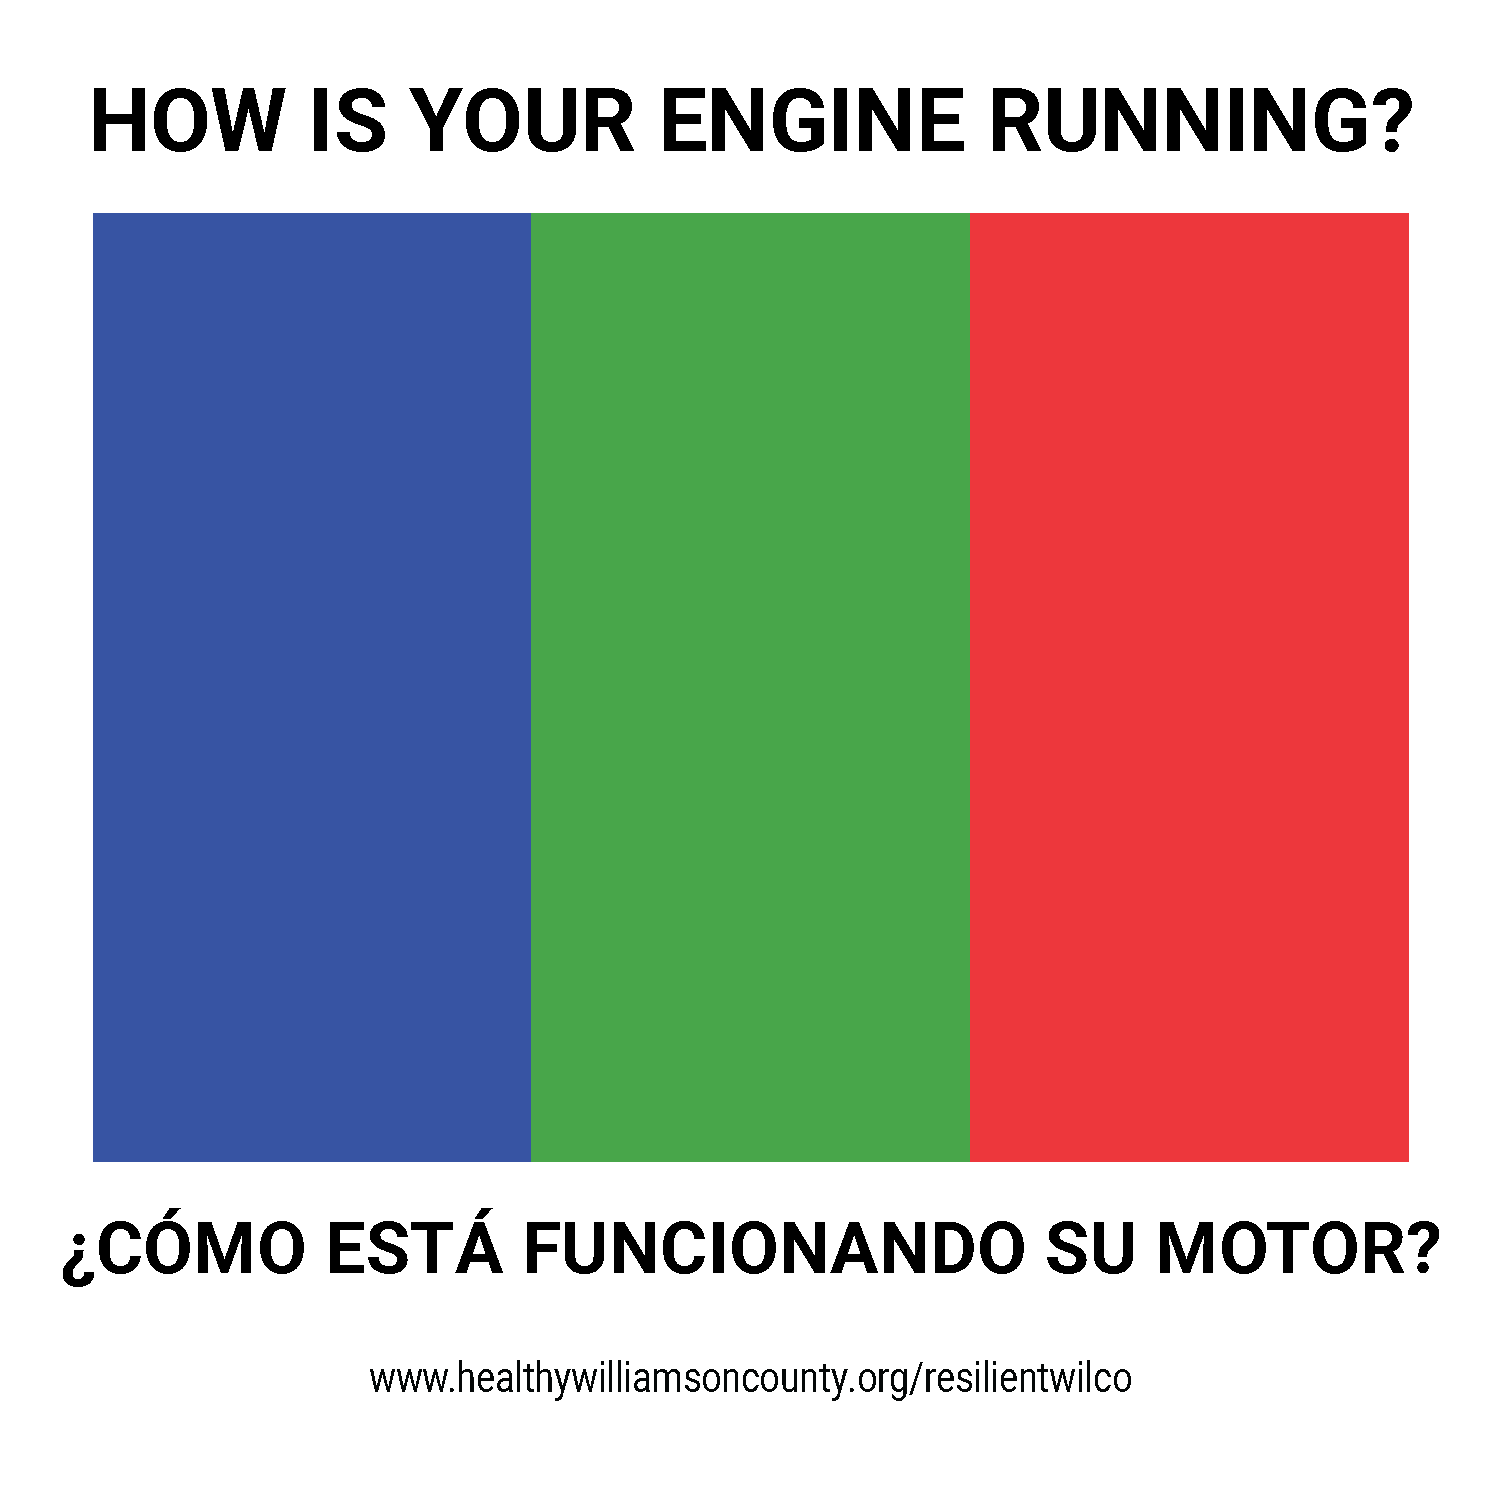 "how is your engine running?" with three rectangles beneath, one blue, one green, and one red. below, the title in spanish: "como esta funcionando su motor?"